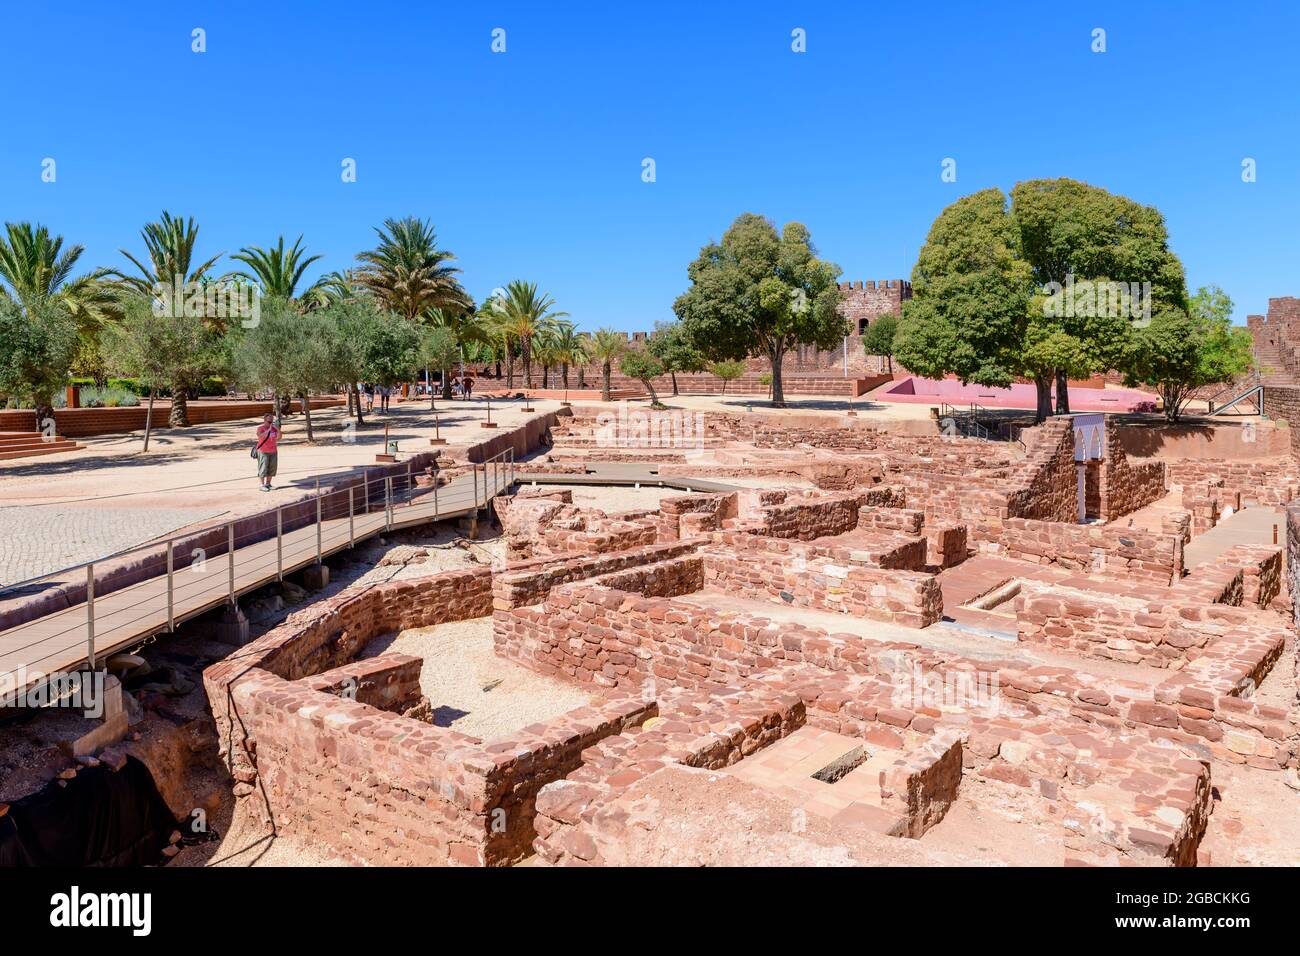 View of the interior and battlements of Silves castle, Castelo de Silves, from within Silves castle, Silves Algarve Portugal. Stock Photo